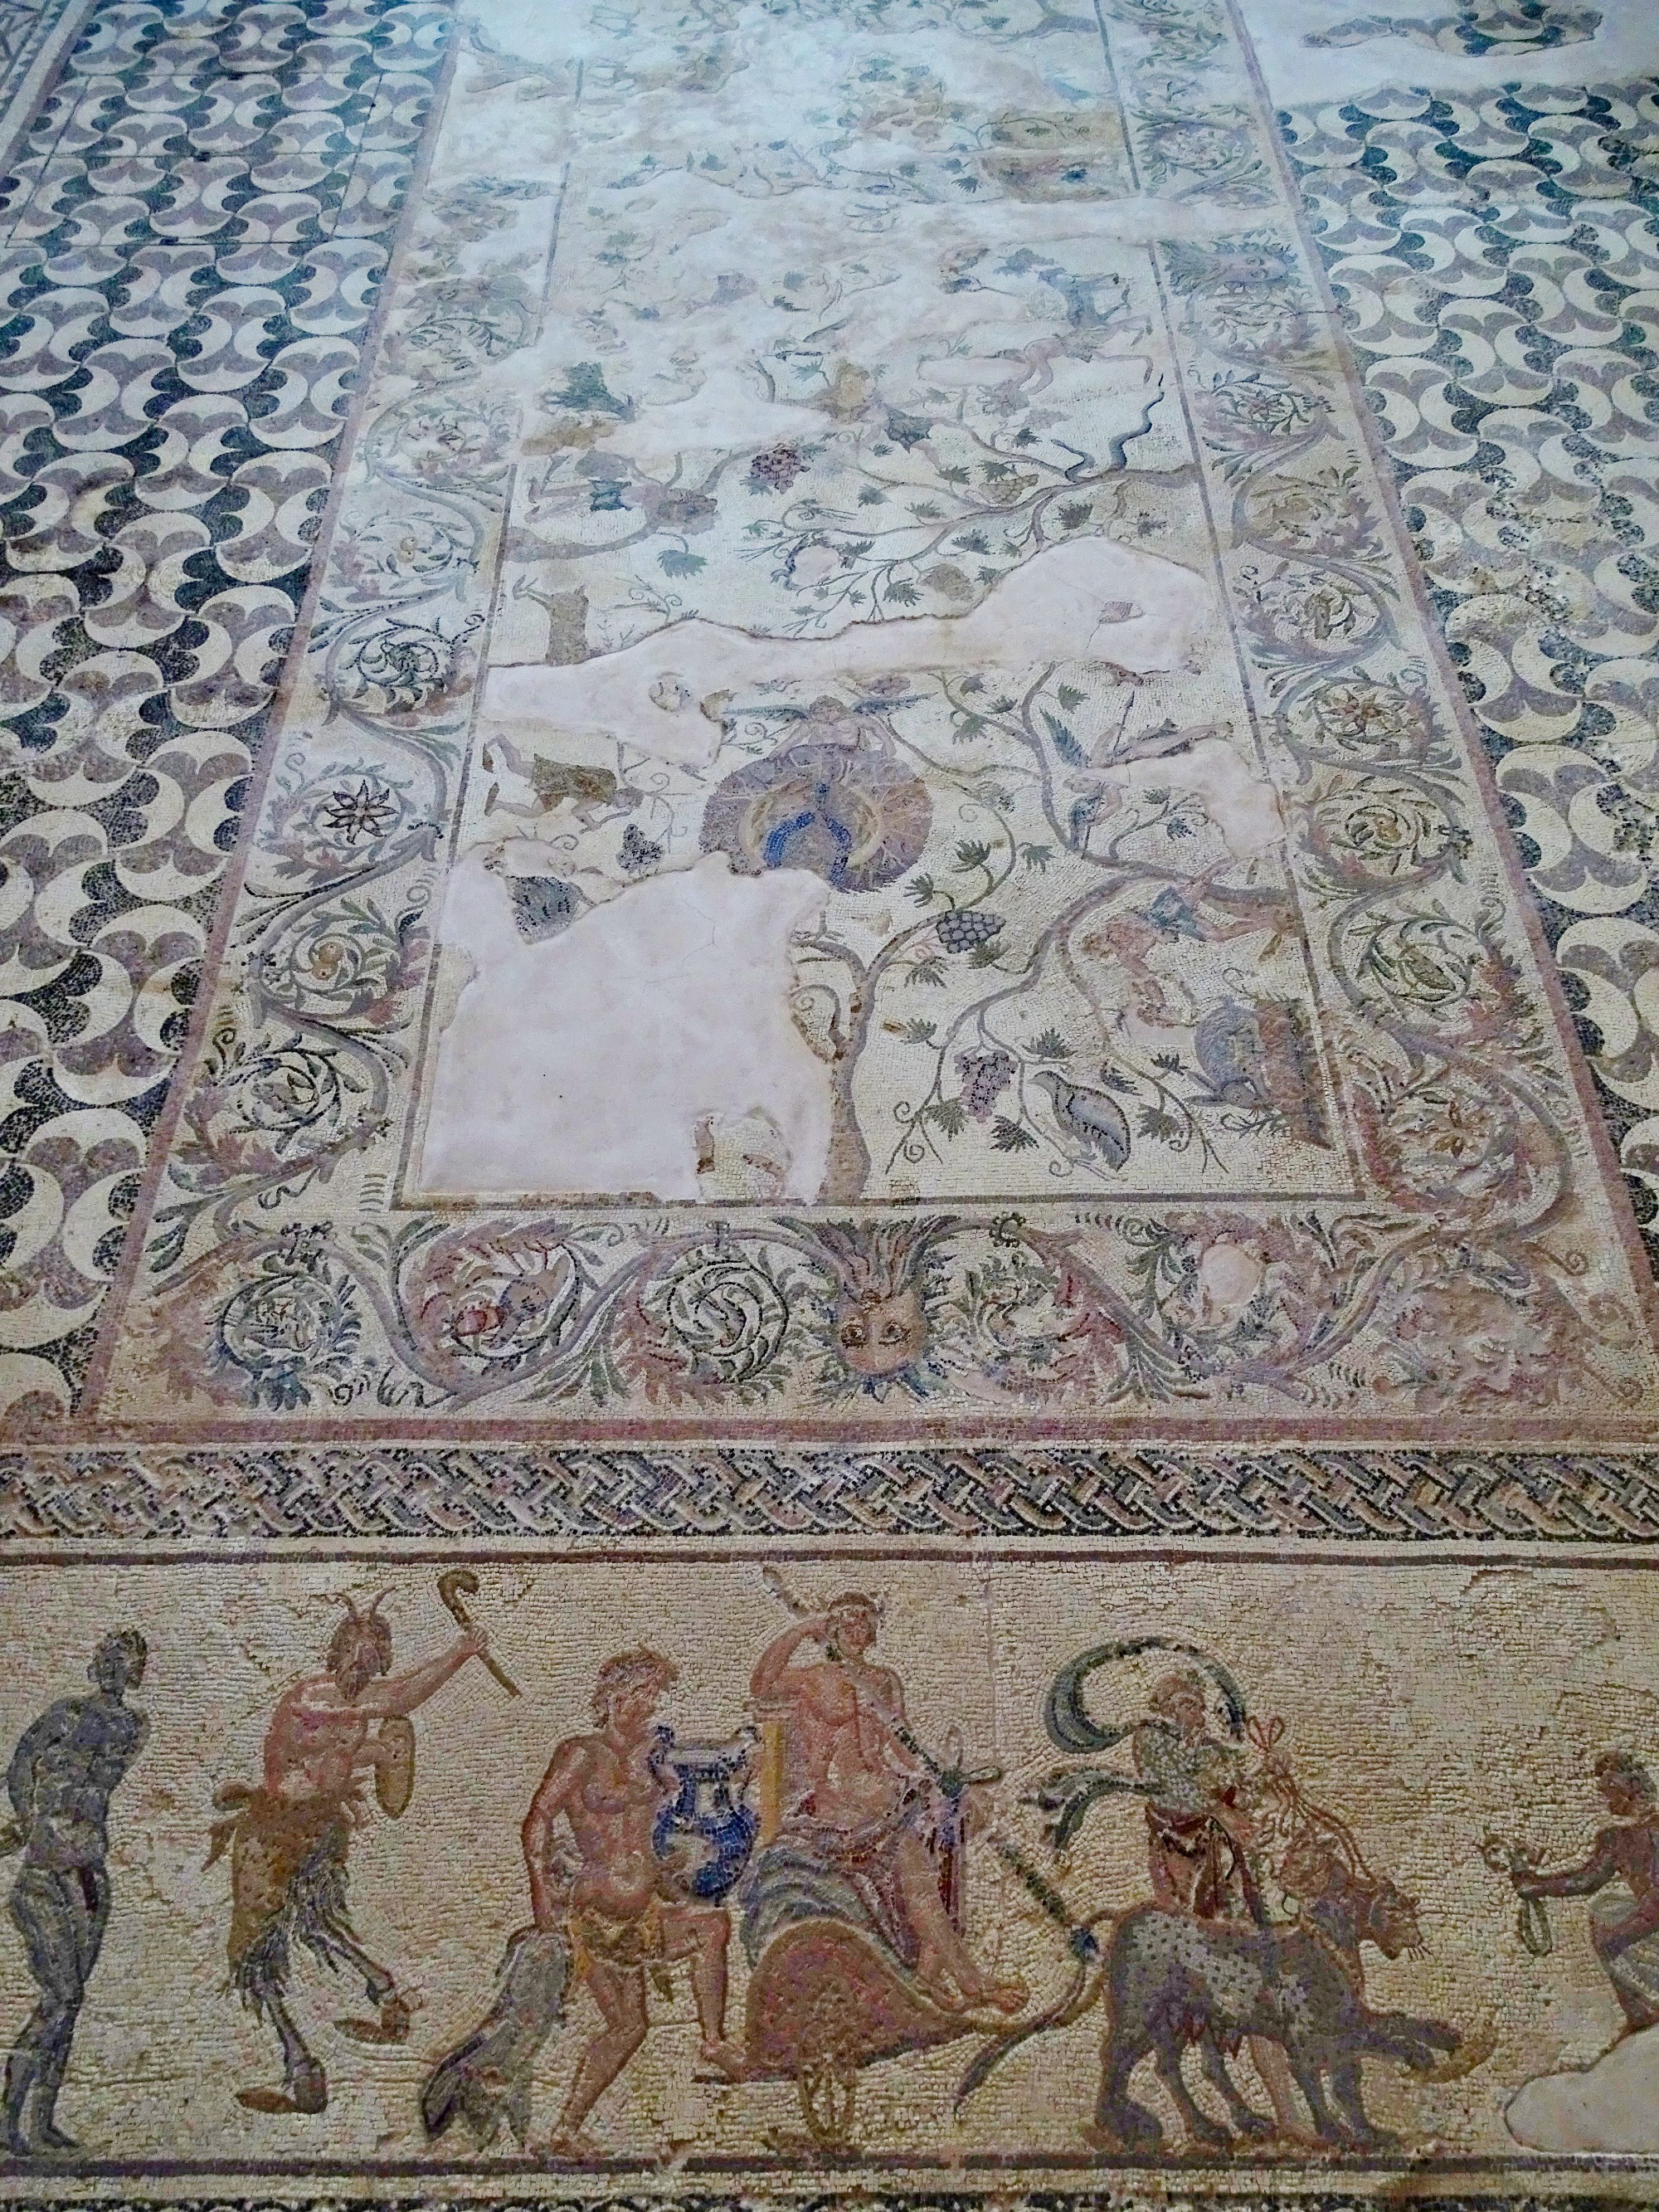 Mosaic in the house of Dionysus